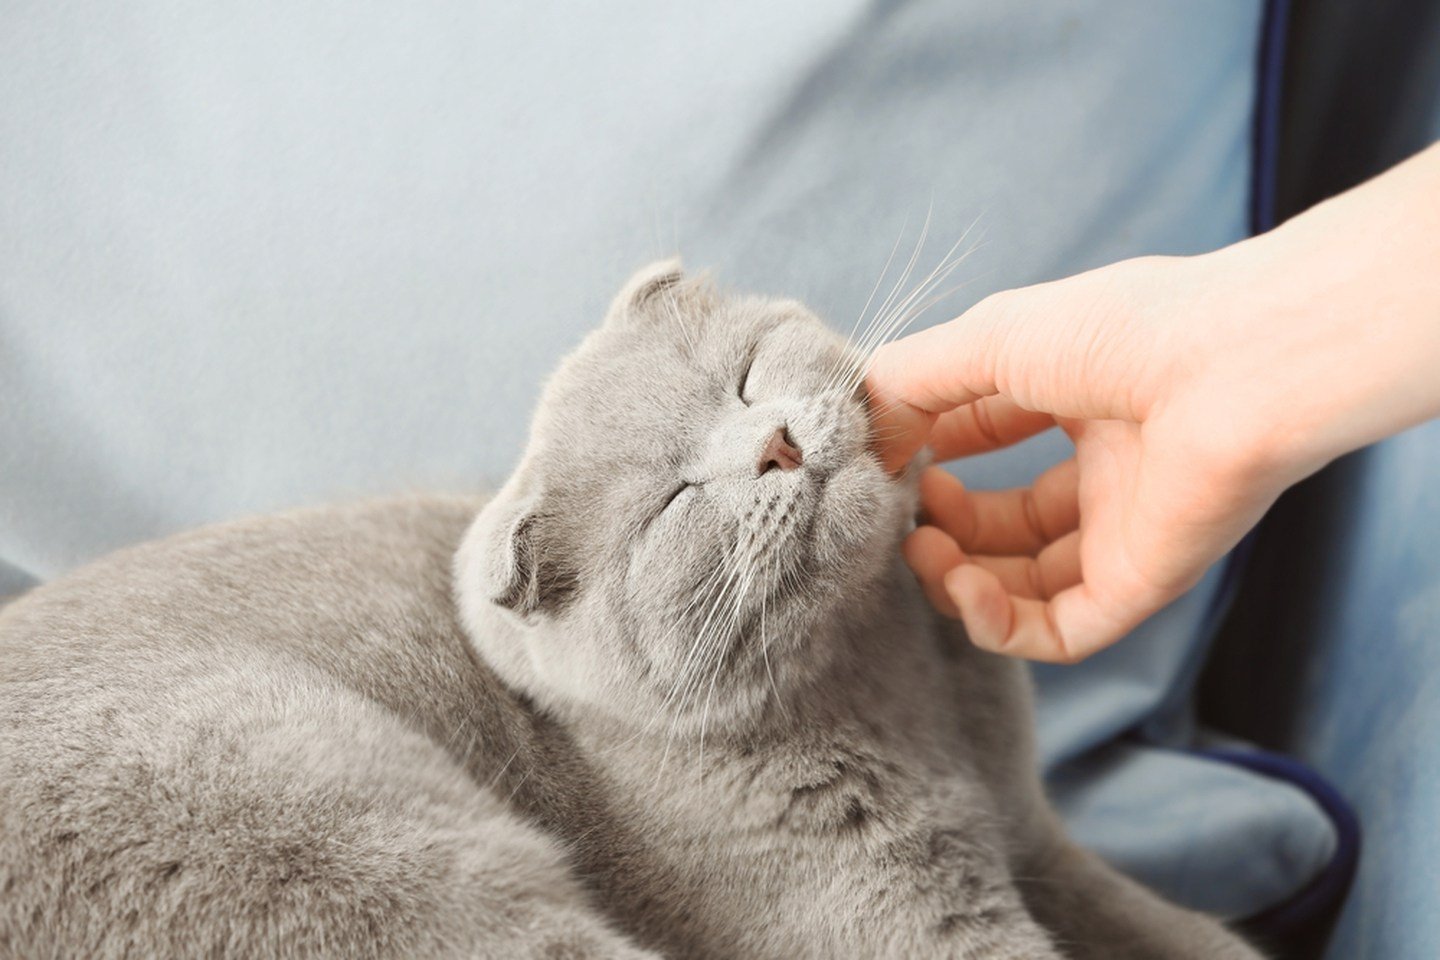 VIDEO: Why Do Cats Purr?